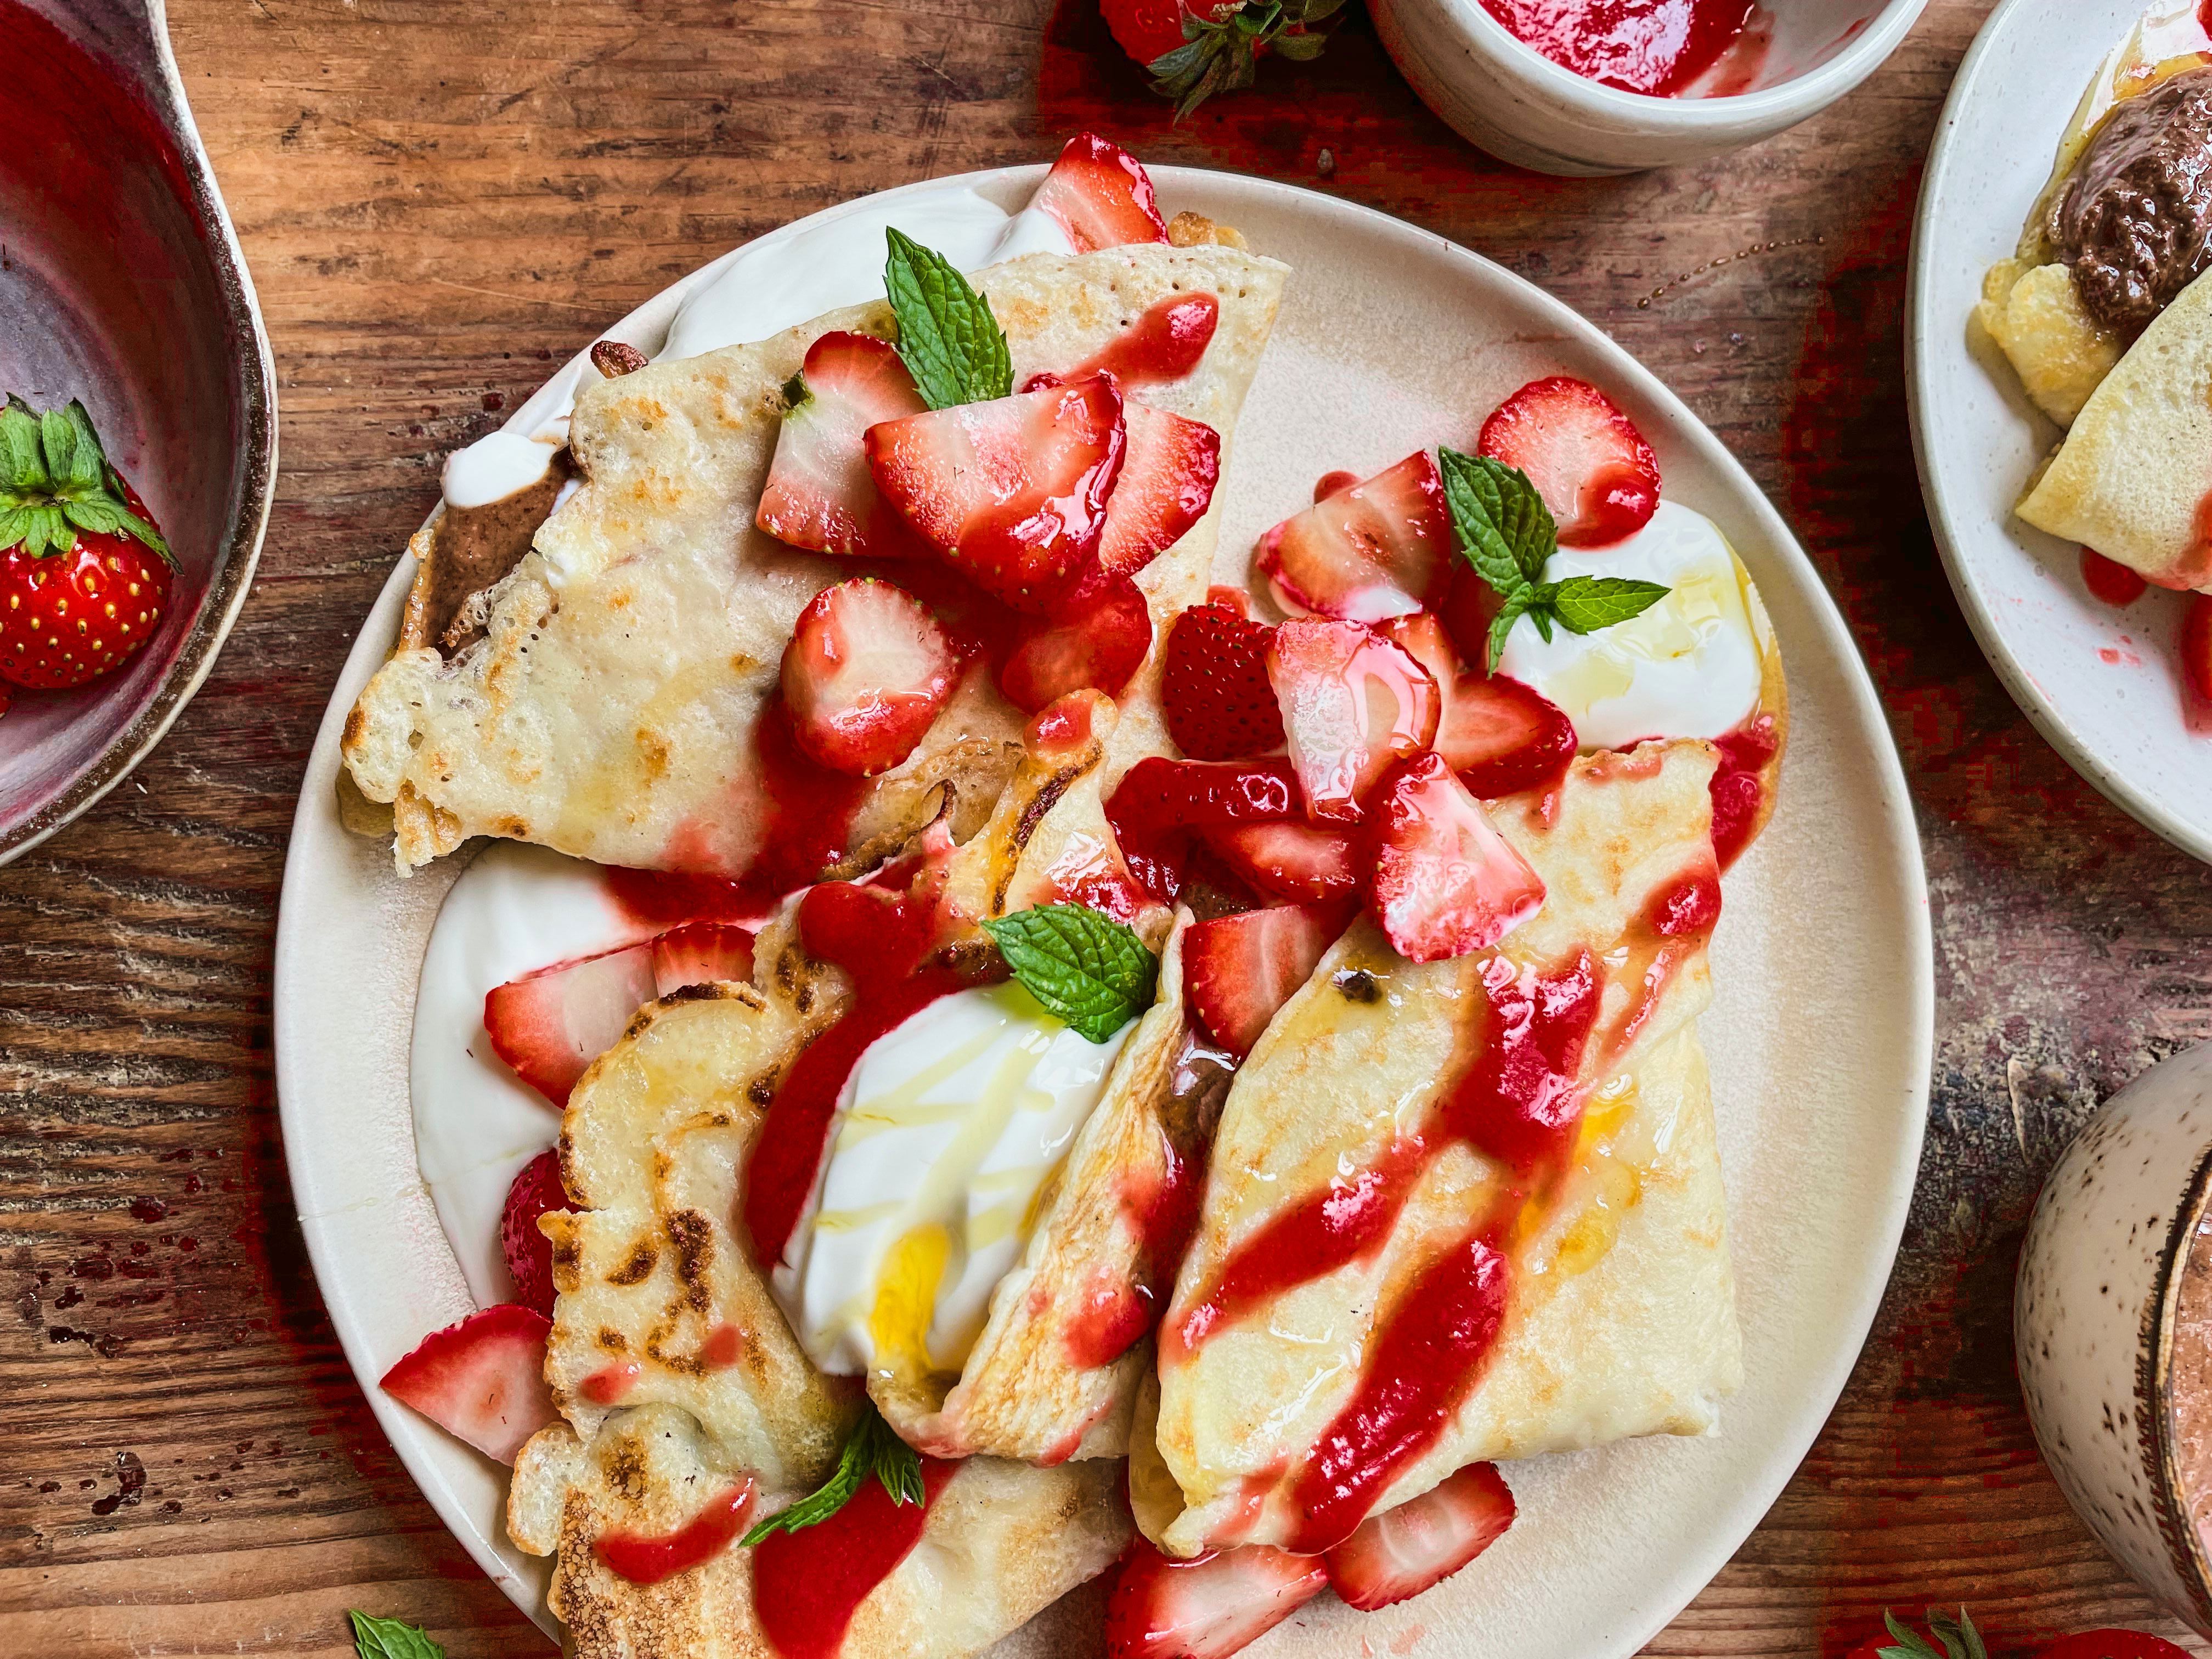 These four-ingredient crepes are incredibly versatile